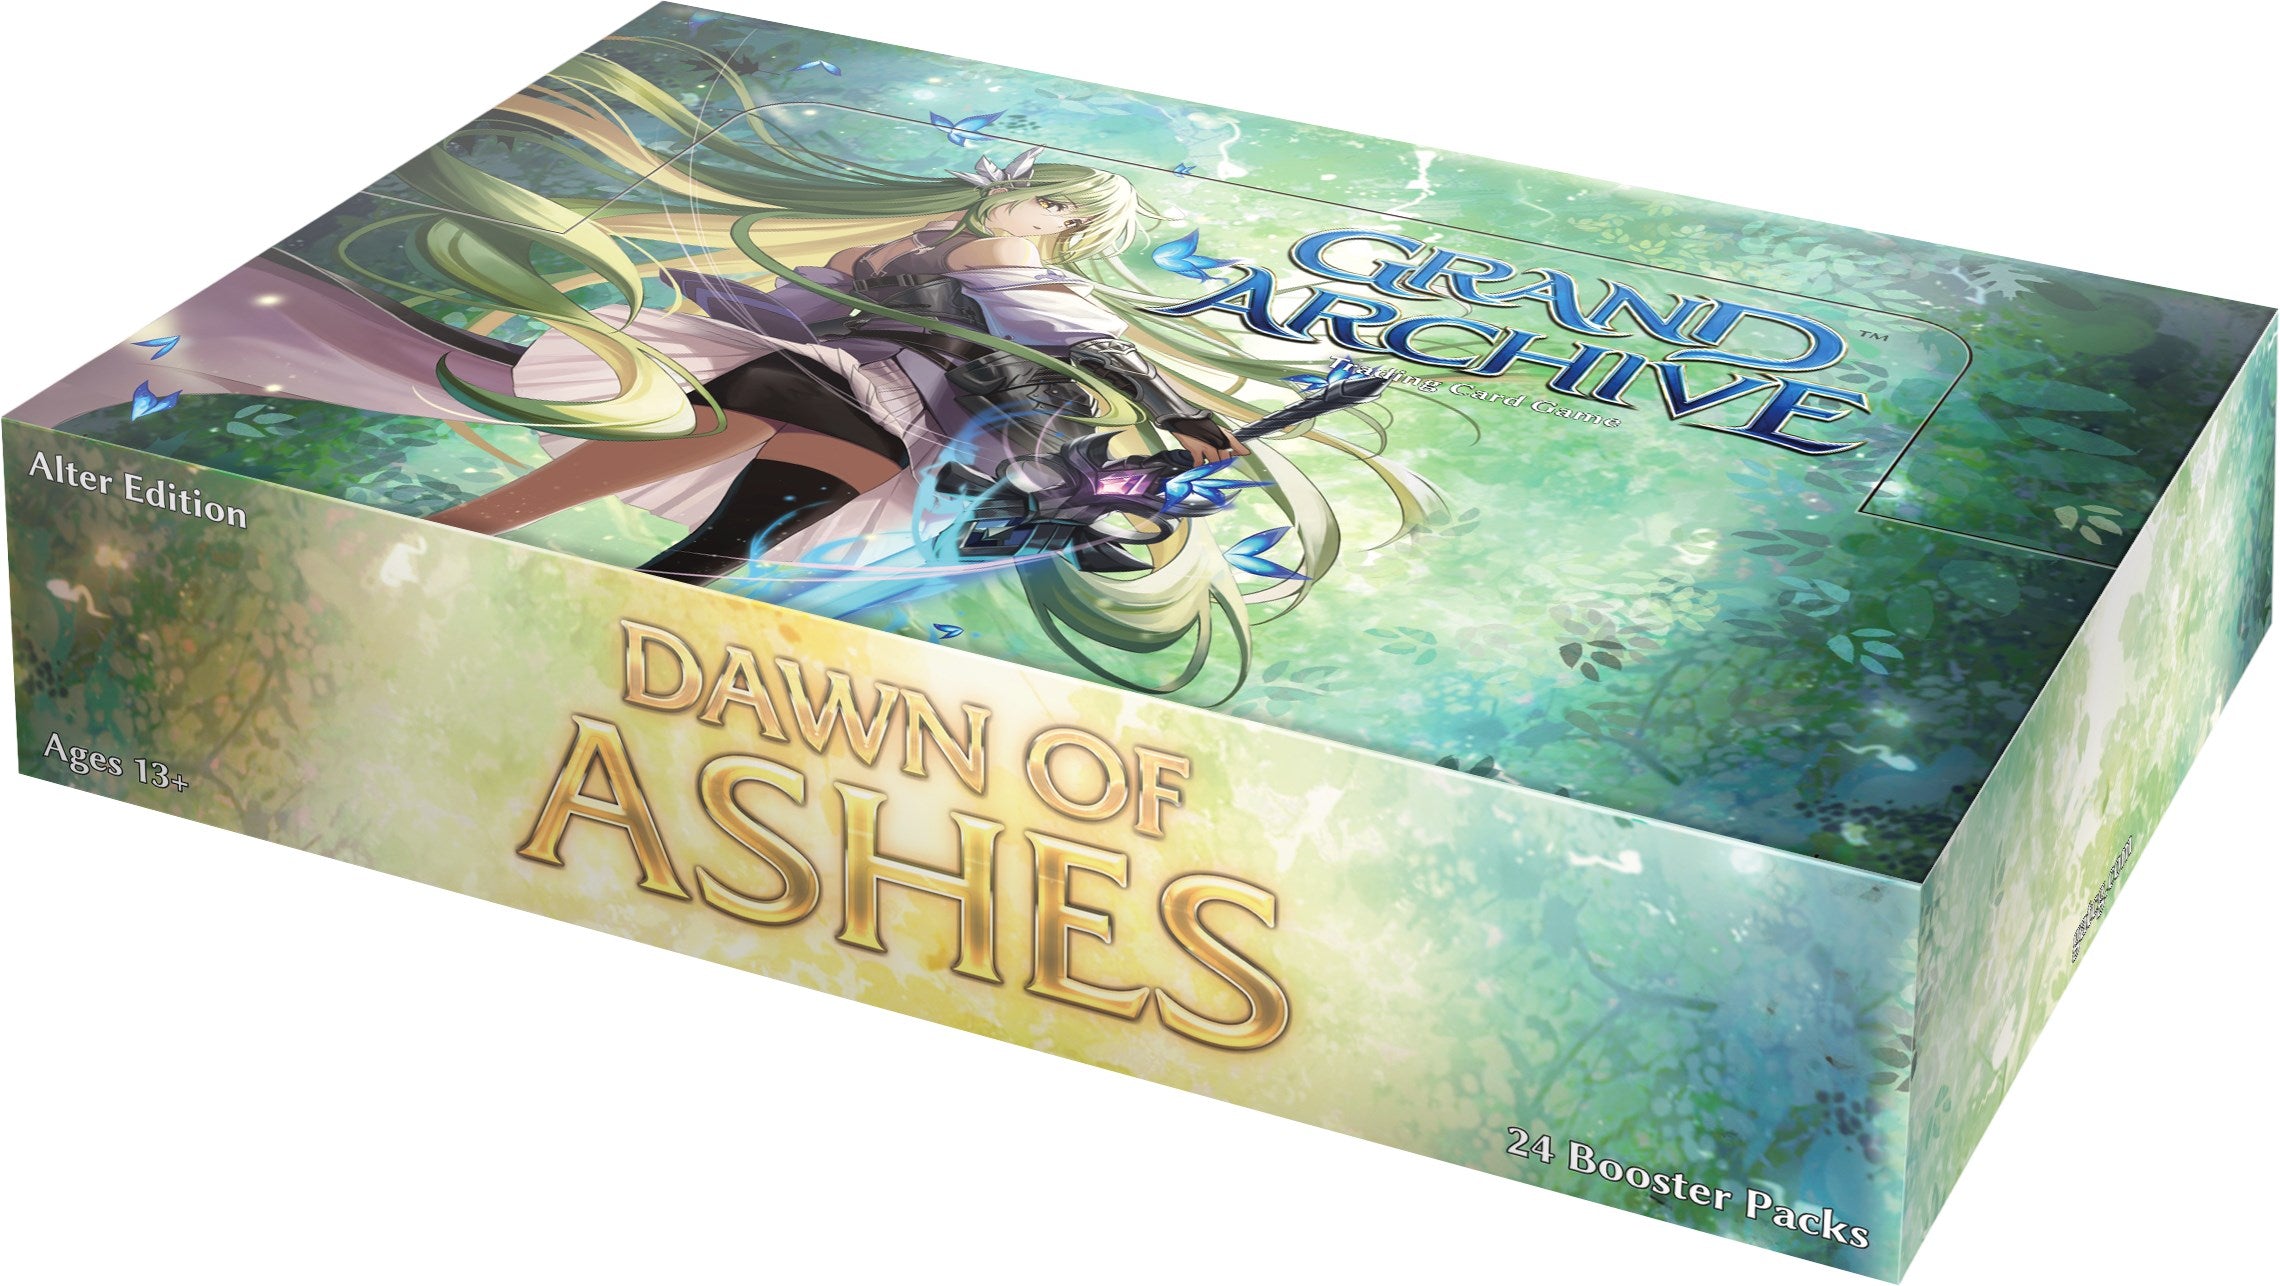 Dawn of Ashes: Alter Edition - Booster Box